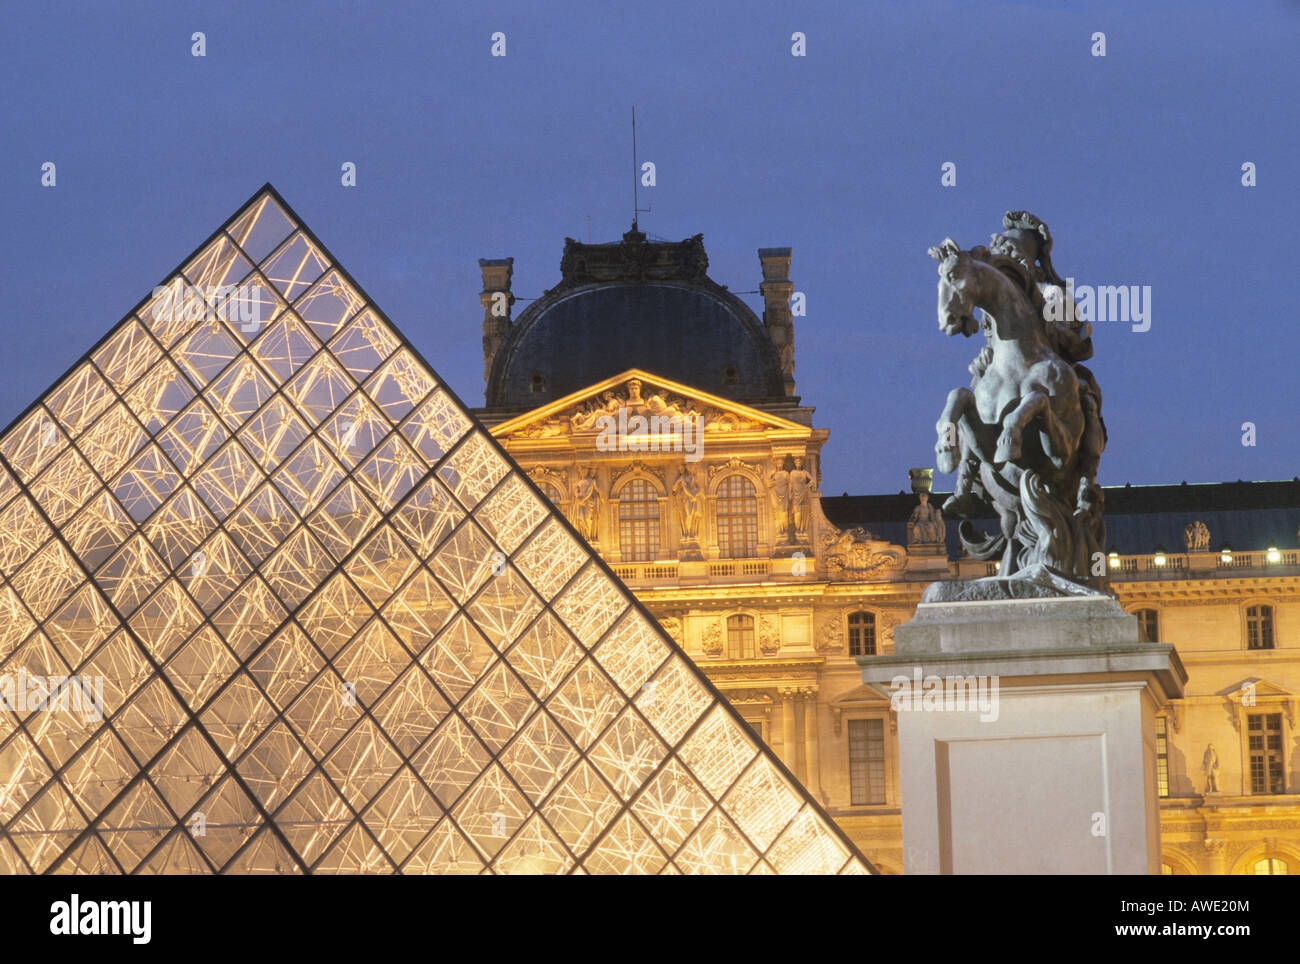 Louvre Paris France Glass Pyramid Cour Napoleon, I. M. Pei architect, courtyard twilight tourism museum old and new Stock Photo